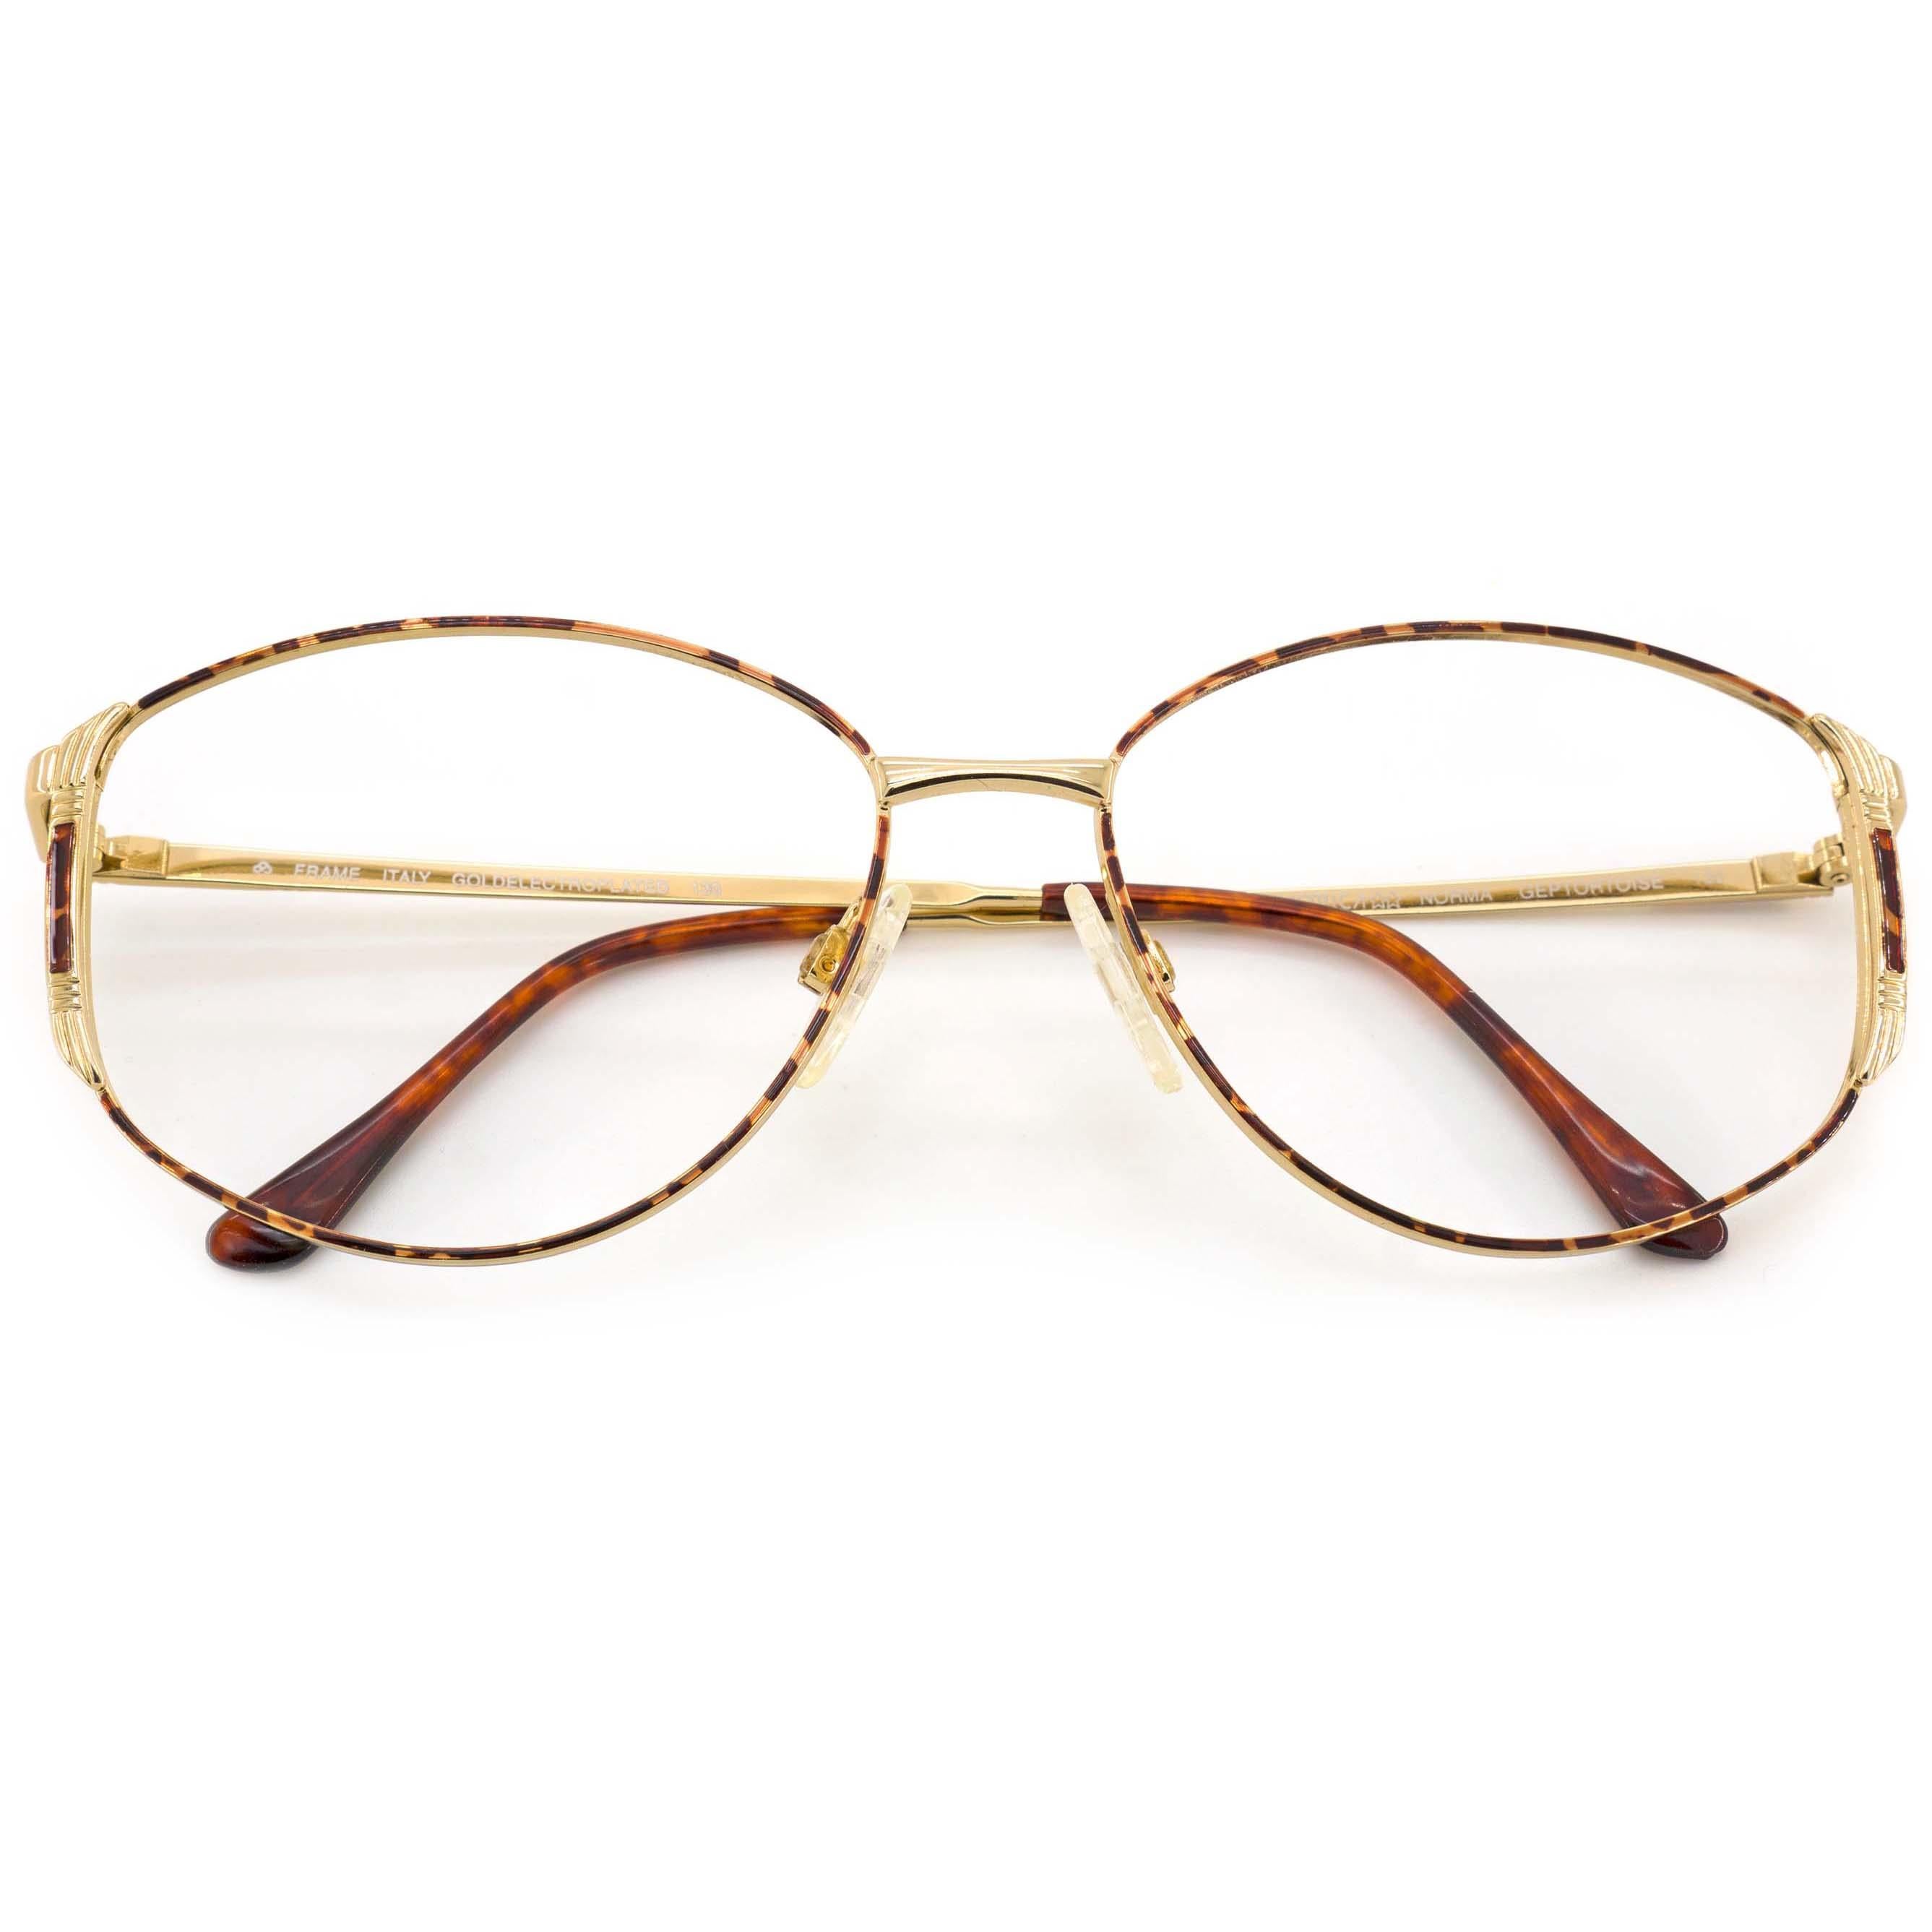 Luxottica goldenelectroplated vintage glasses frame In Excellent Condition For Sale In Santa Clarita, CA